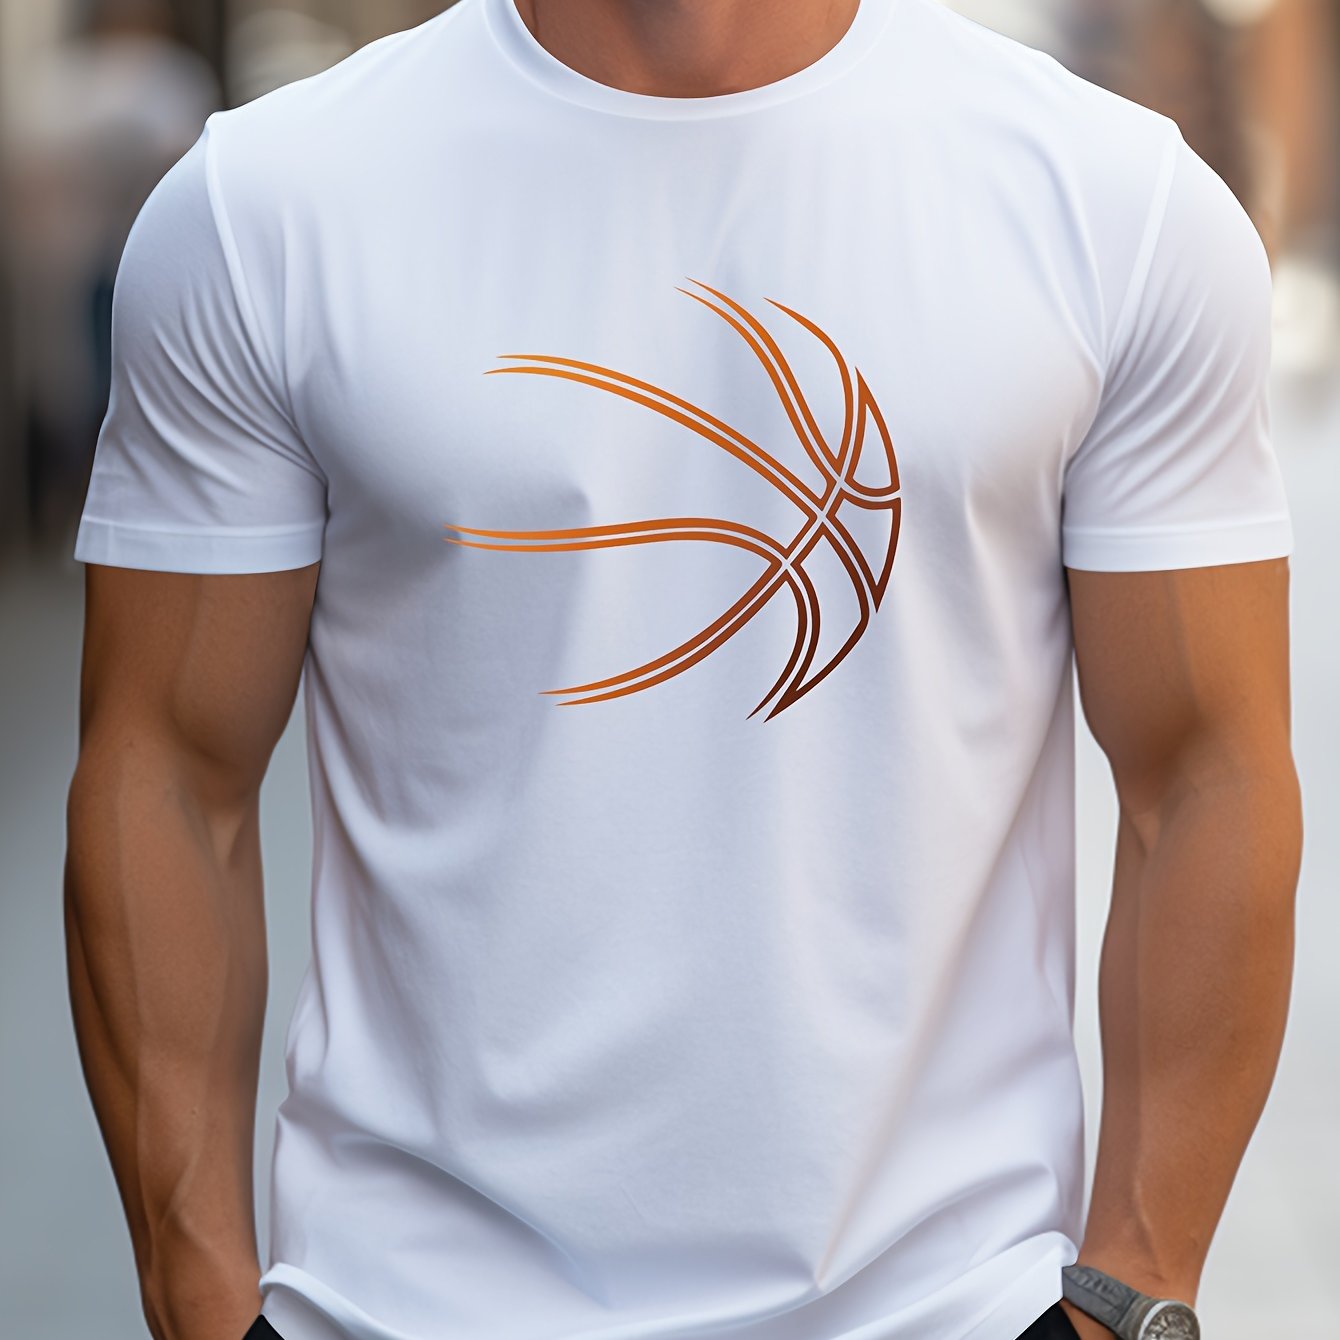 Basketball Graphic Print Men's Creative Top, Casual Short Sleeve Crew Neck T-shirt, Men's Clothing For Summer Outdoor